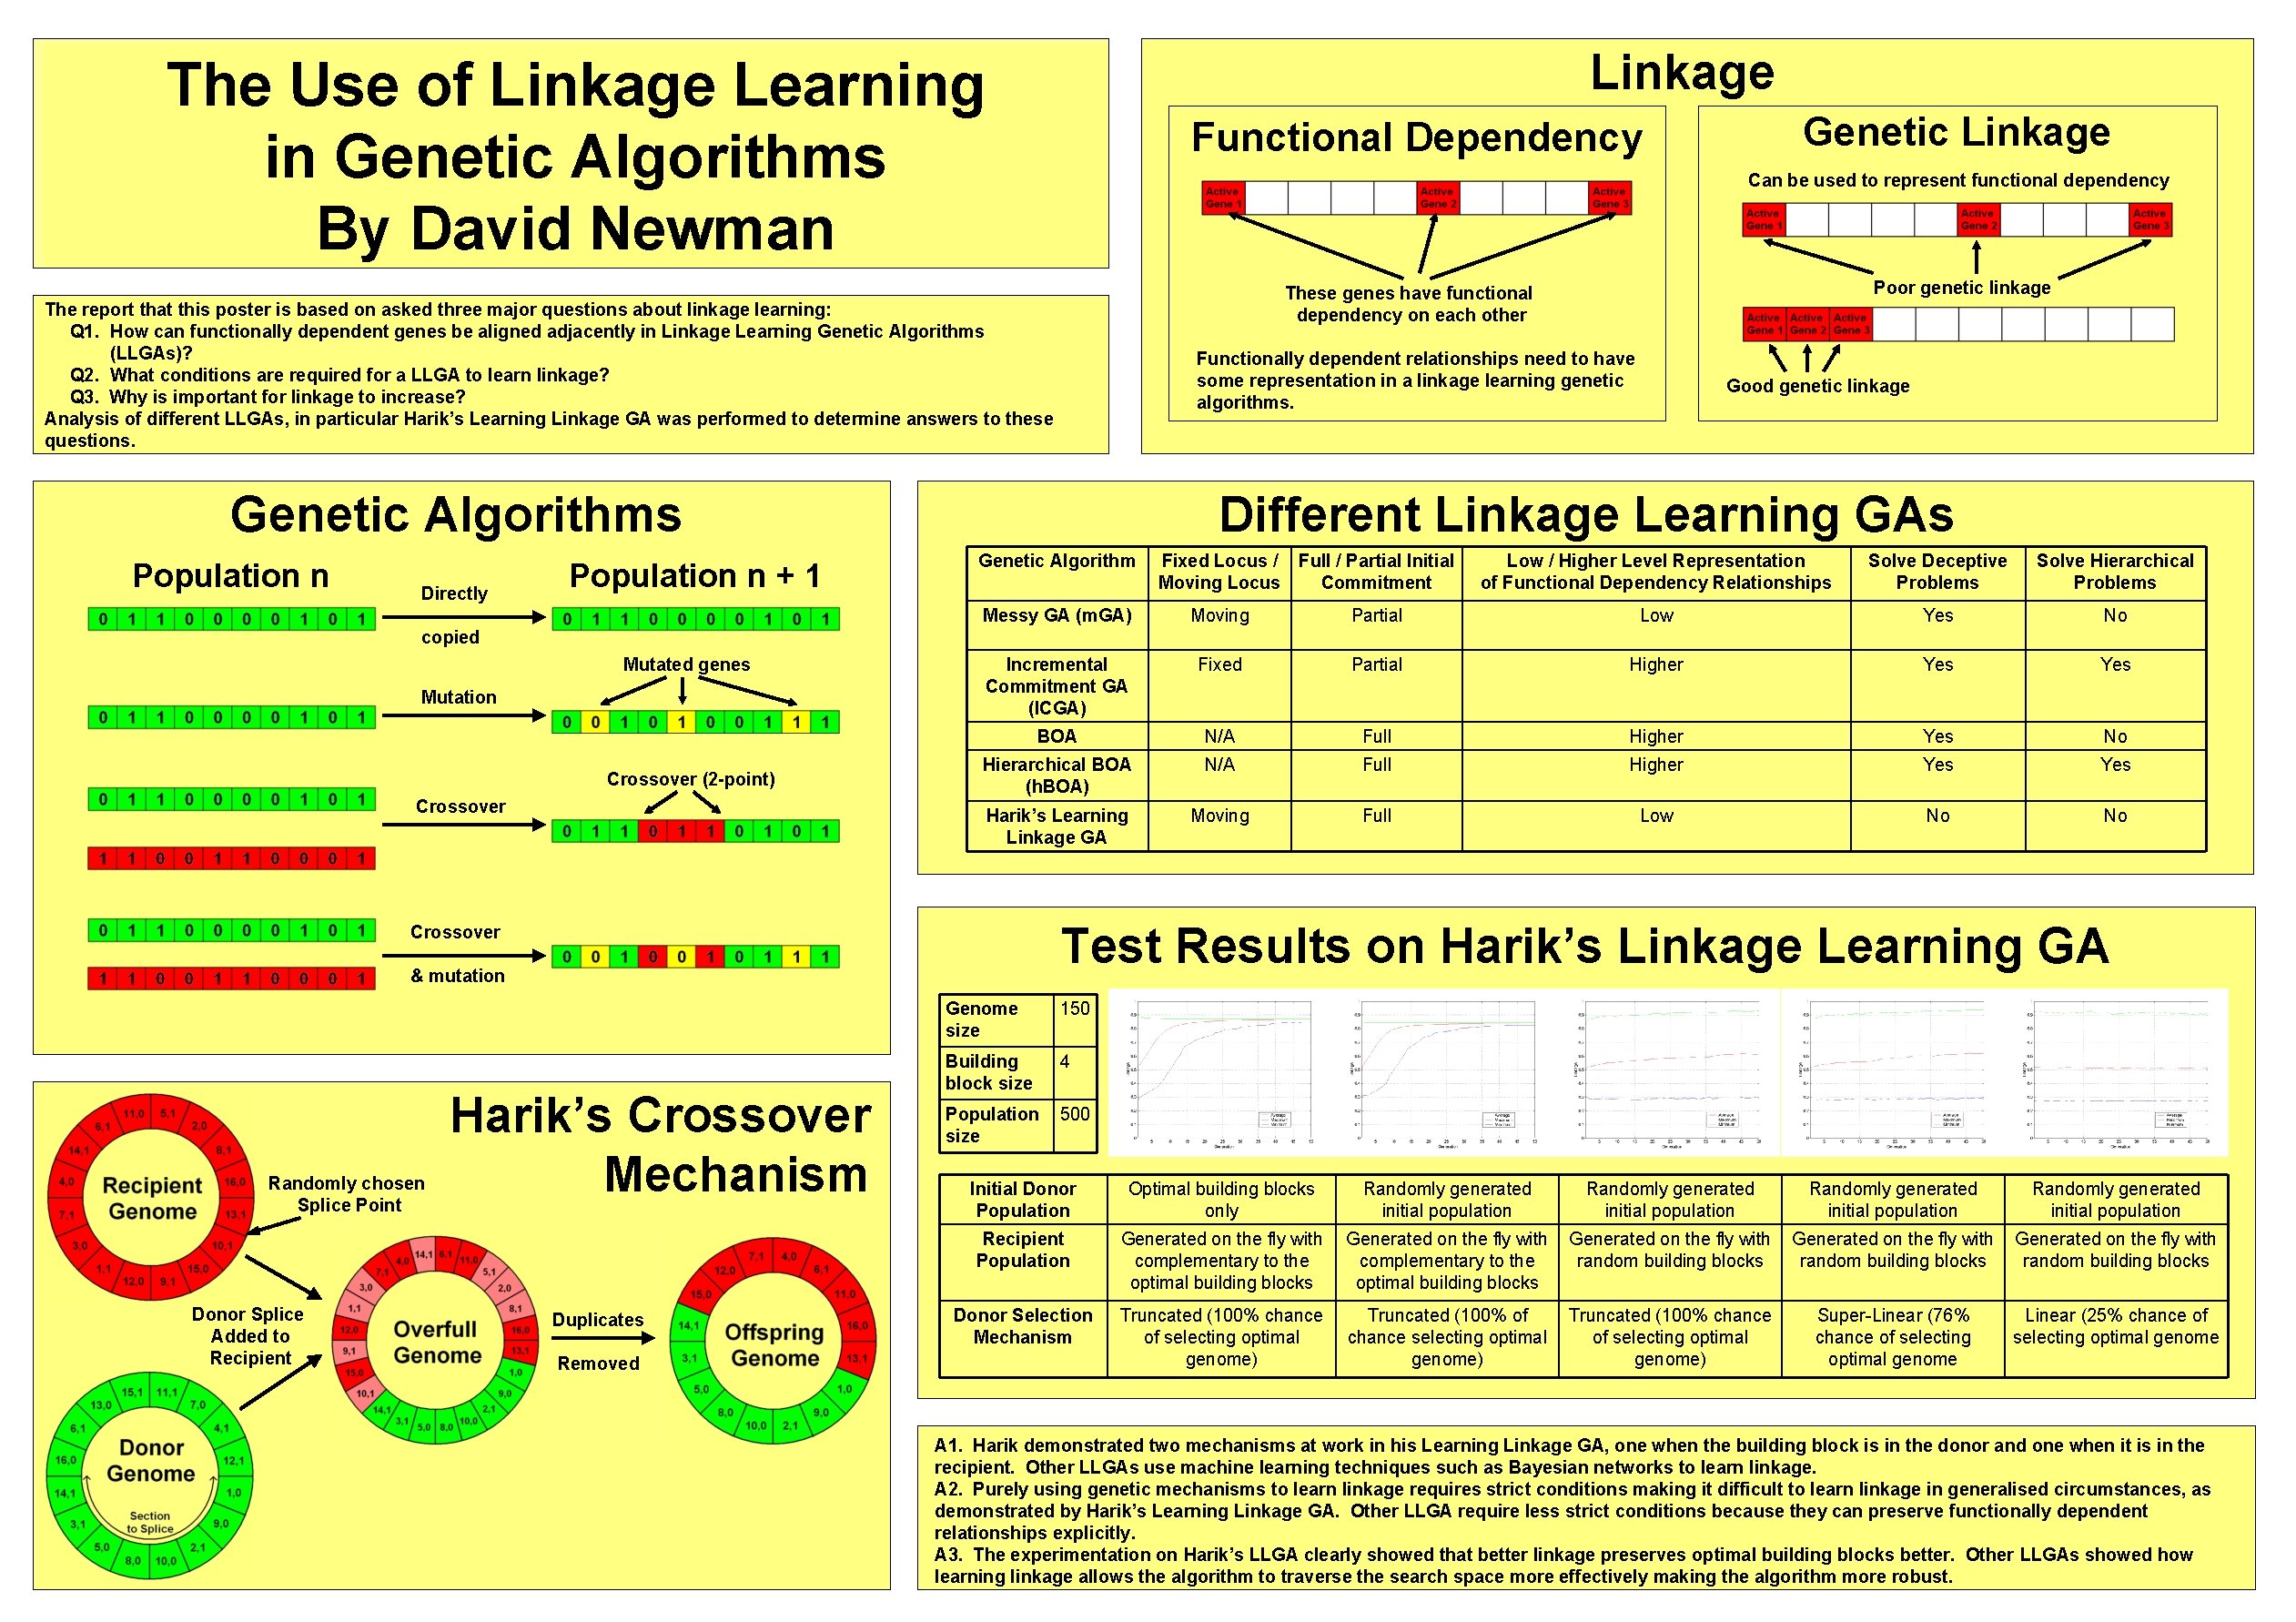 Linkage The Use of Linkage Learning in Genetic Algorithms By David Newman Can be